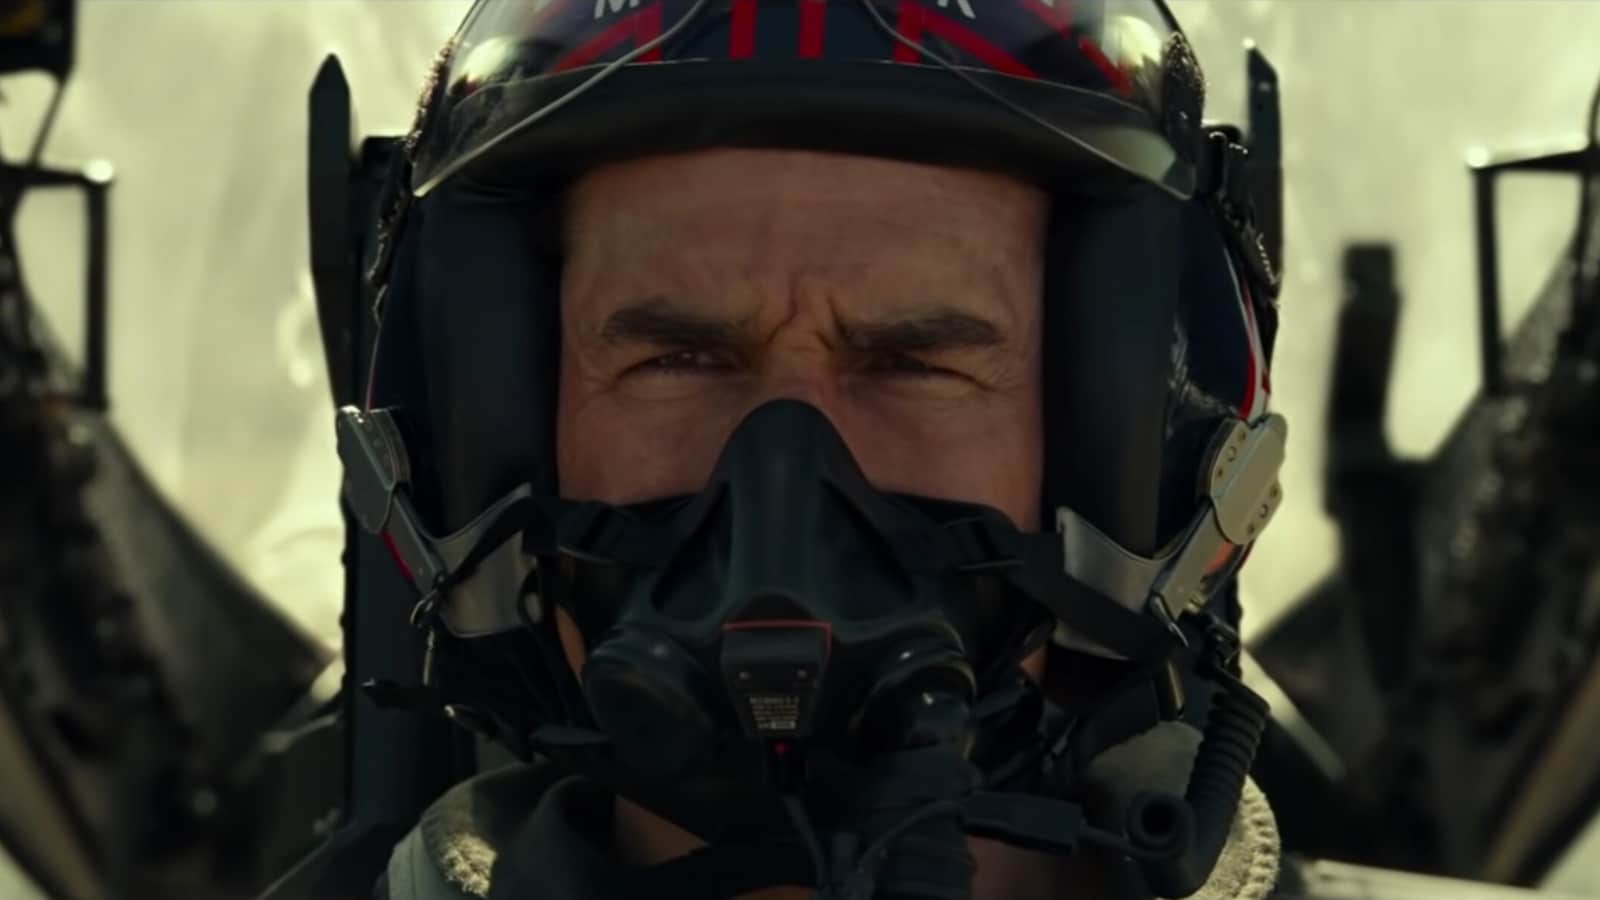 Top Gun Maverick trailer: Tom Cruise zooms in a fighter jet to May 27 release